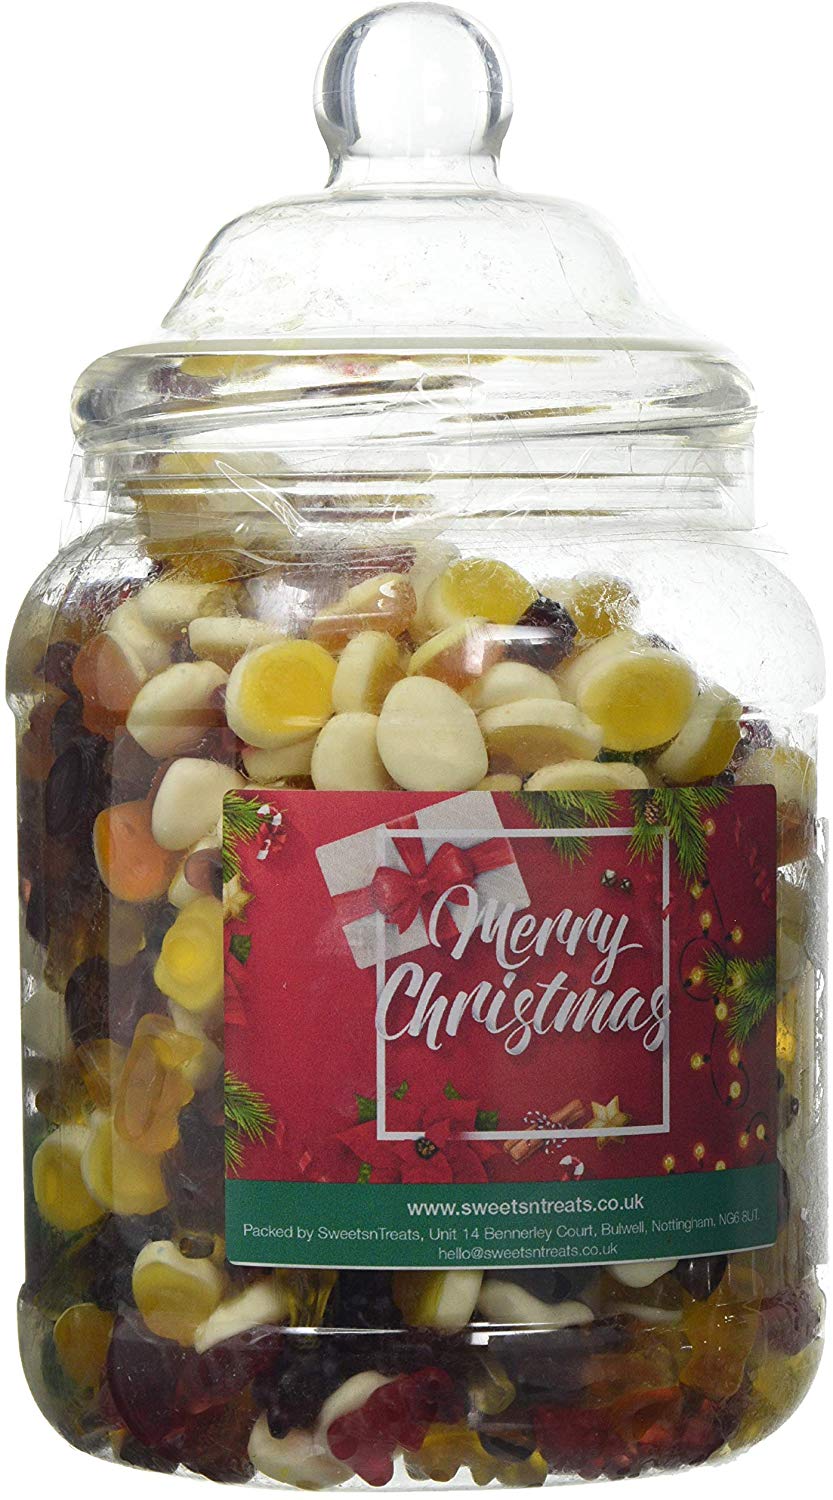 Mr Tubbys Jelly Mix - Merry Christmas Red Label - Large Jar 1500g